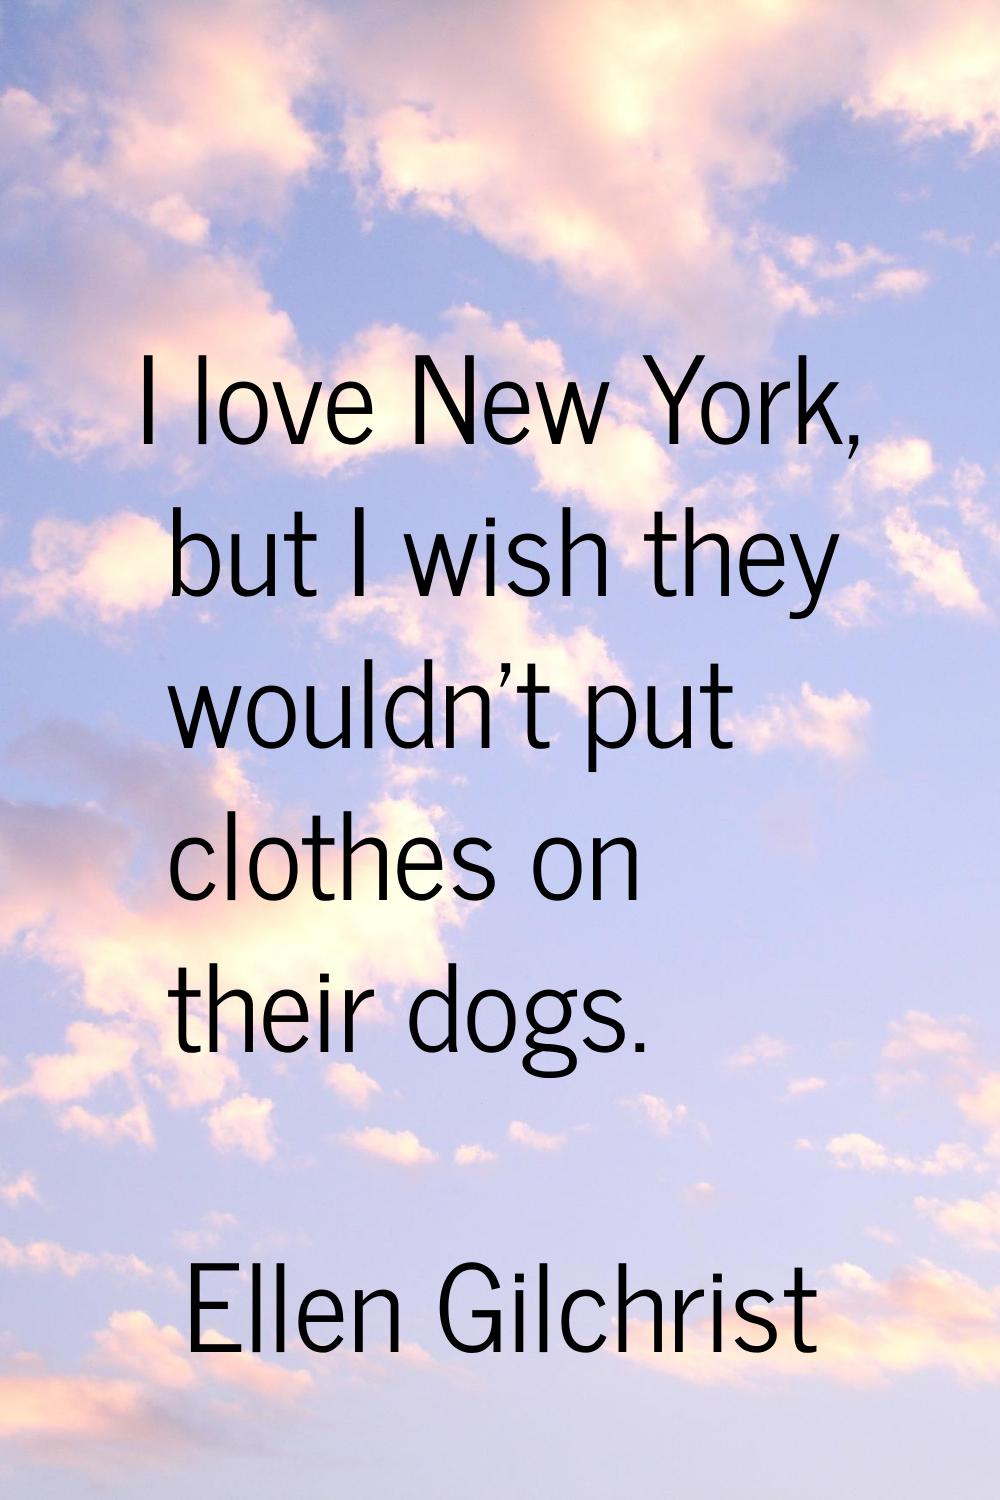 I love New York, but I wish they wouldn't put clothes on their dogs.